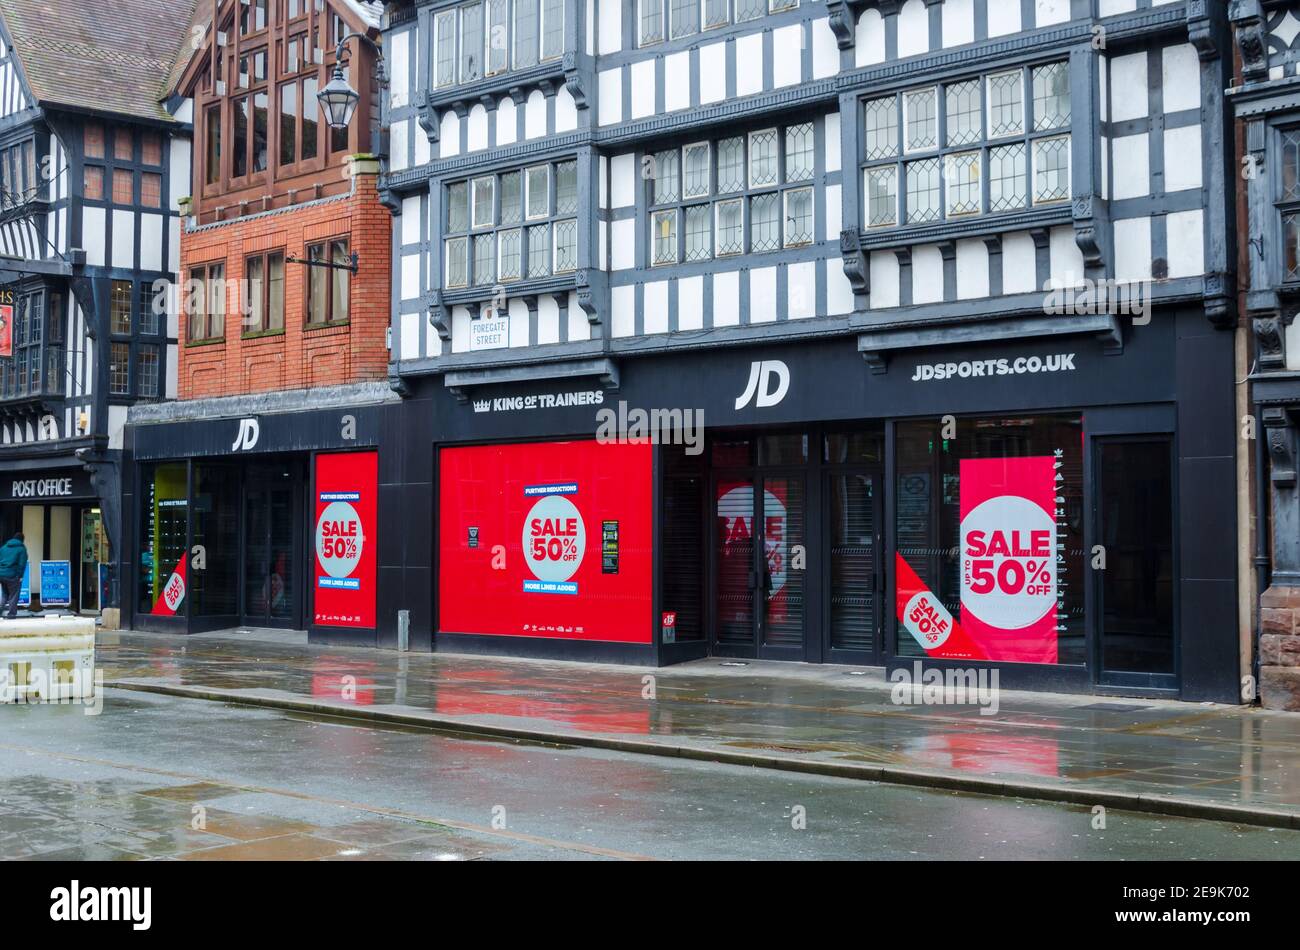 Chester; UK: Jan 29, 2021: The J D Sports store on Foregate Street is having a sale with reductions up to half price. Stock Photo